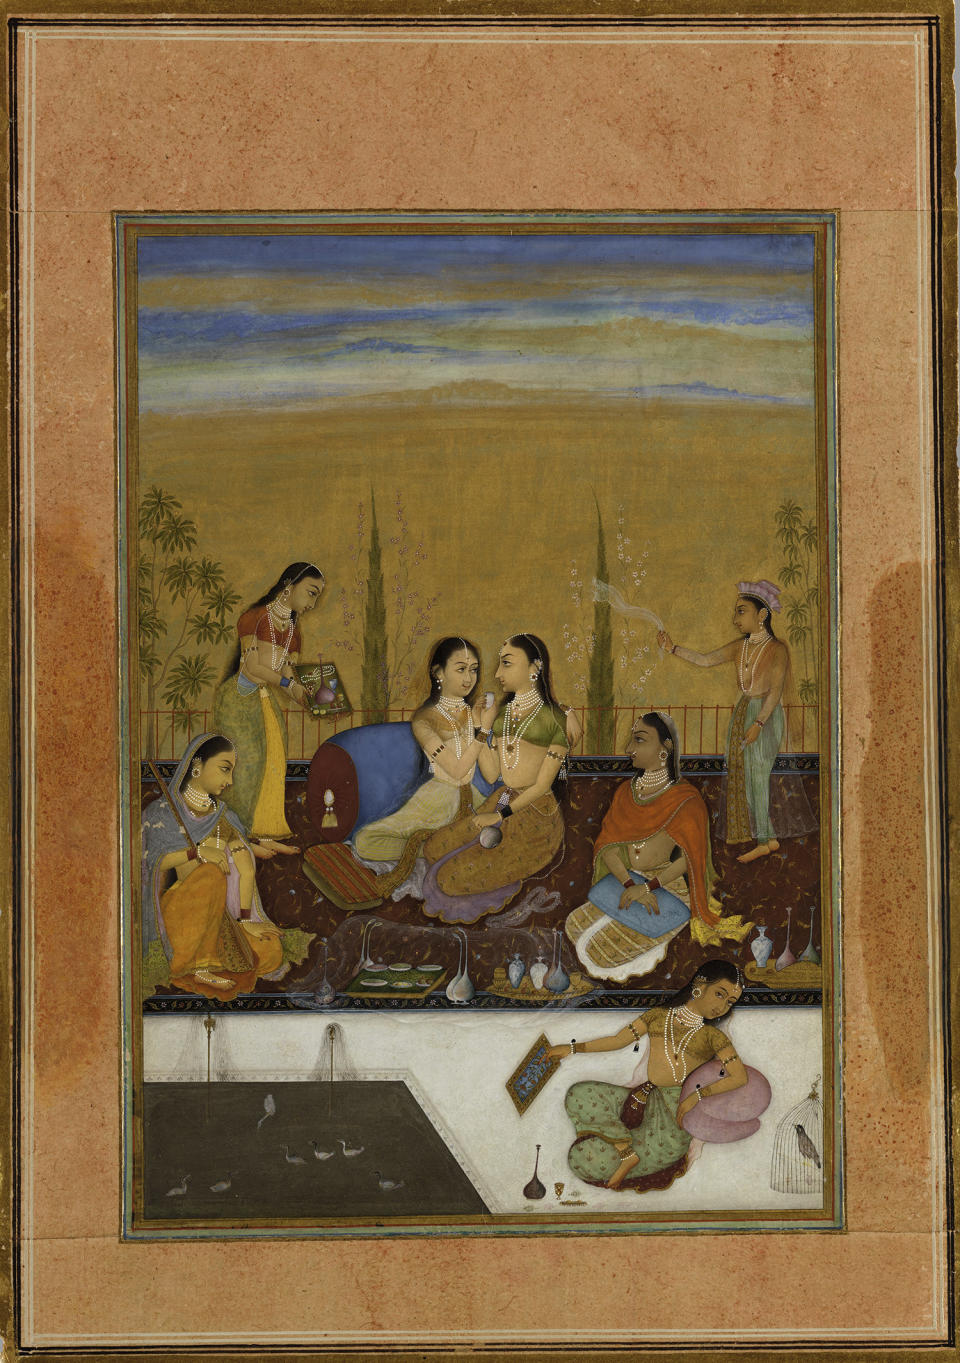 <strong>Ladies on a Terrace.</strong>&nbsp;Painted by the artist Ruknuddin (active ca. 1650&ndash;ca.&nbsp;1697)&nbsp;Rajasthan, kingdom of Bikaner, dated 1675&nbsp;Opaque watercolor, black ink, and gold on paper; wide&nbsp;light brown border with variously colored inner rules;&nbsp;painting 7 5/8 x 5 5/16 in. (19.4 x 13.5 cm),&nbsp;Promised Gift of the Kronos Collections, 2015